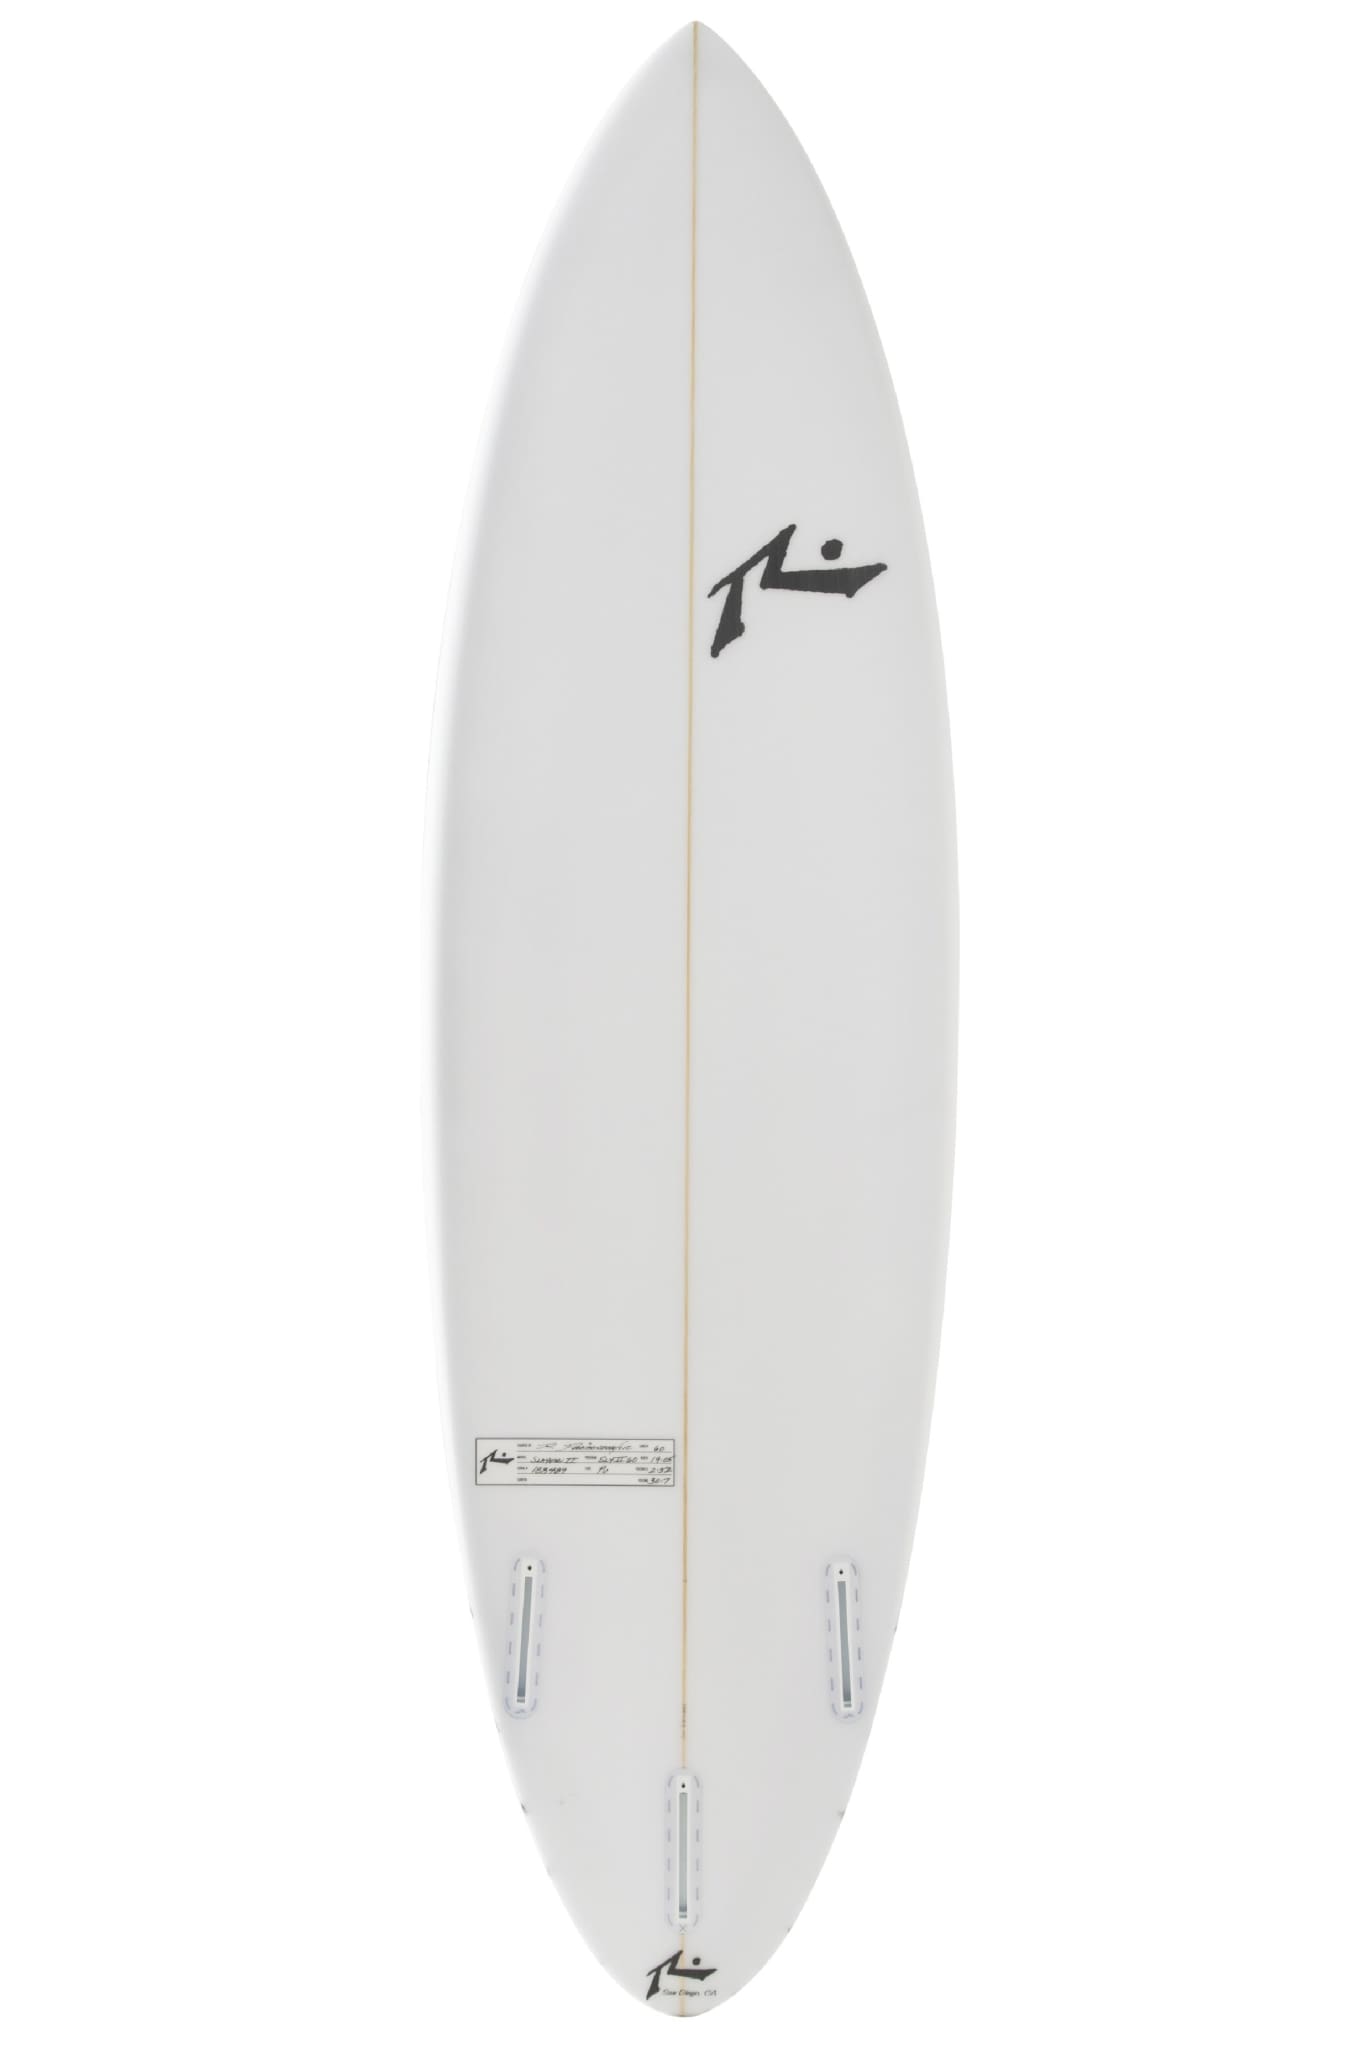 Slayer 2 | Surfboards-Rusty Surfboards South Africa